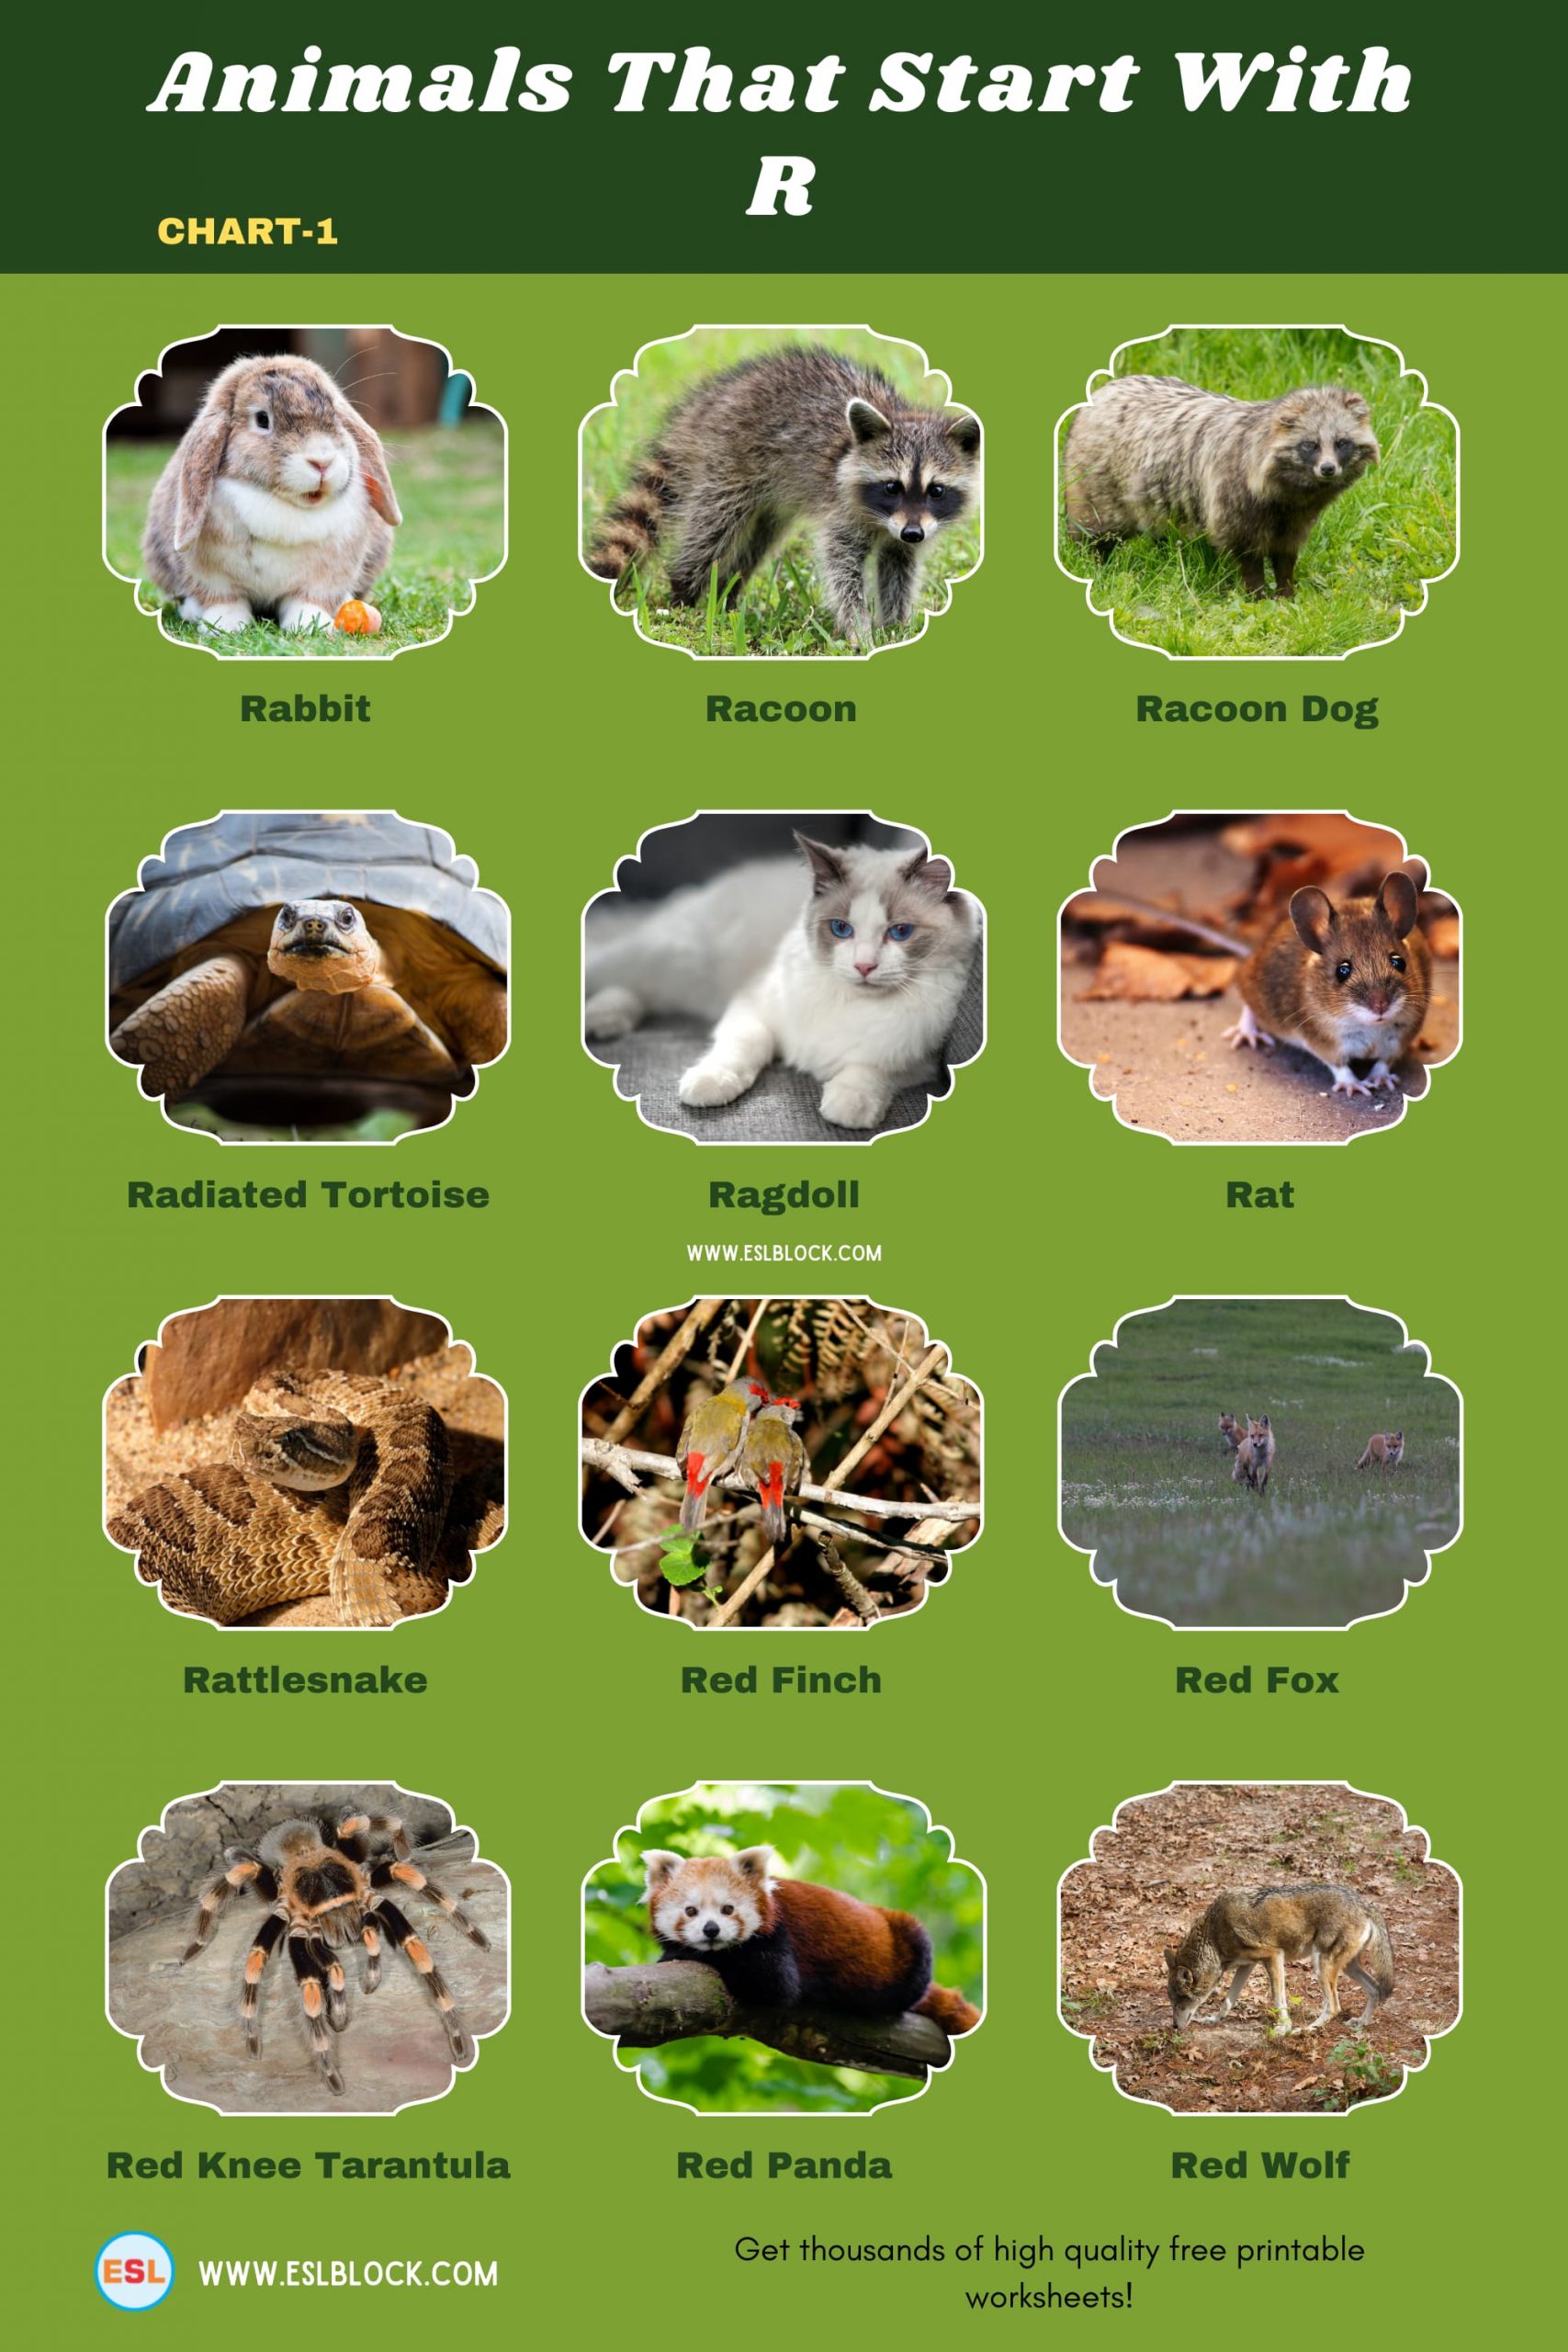 5 Letter Animals Starting With R, Animals List, Animals Names, Animals That Begins With R, Animals That Start With R, English, English Nouns, English Vocabulary, English Words, List of Animals That Start With R, Nouns, R Animals, R Animals in English, R Animals Names, Vocabulary